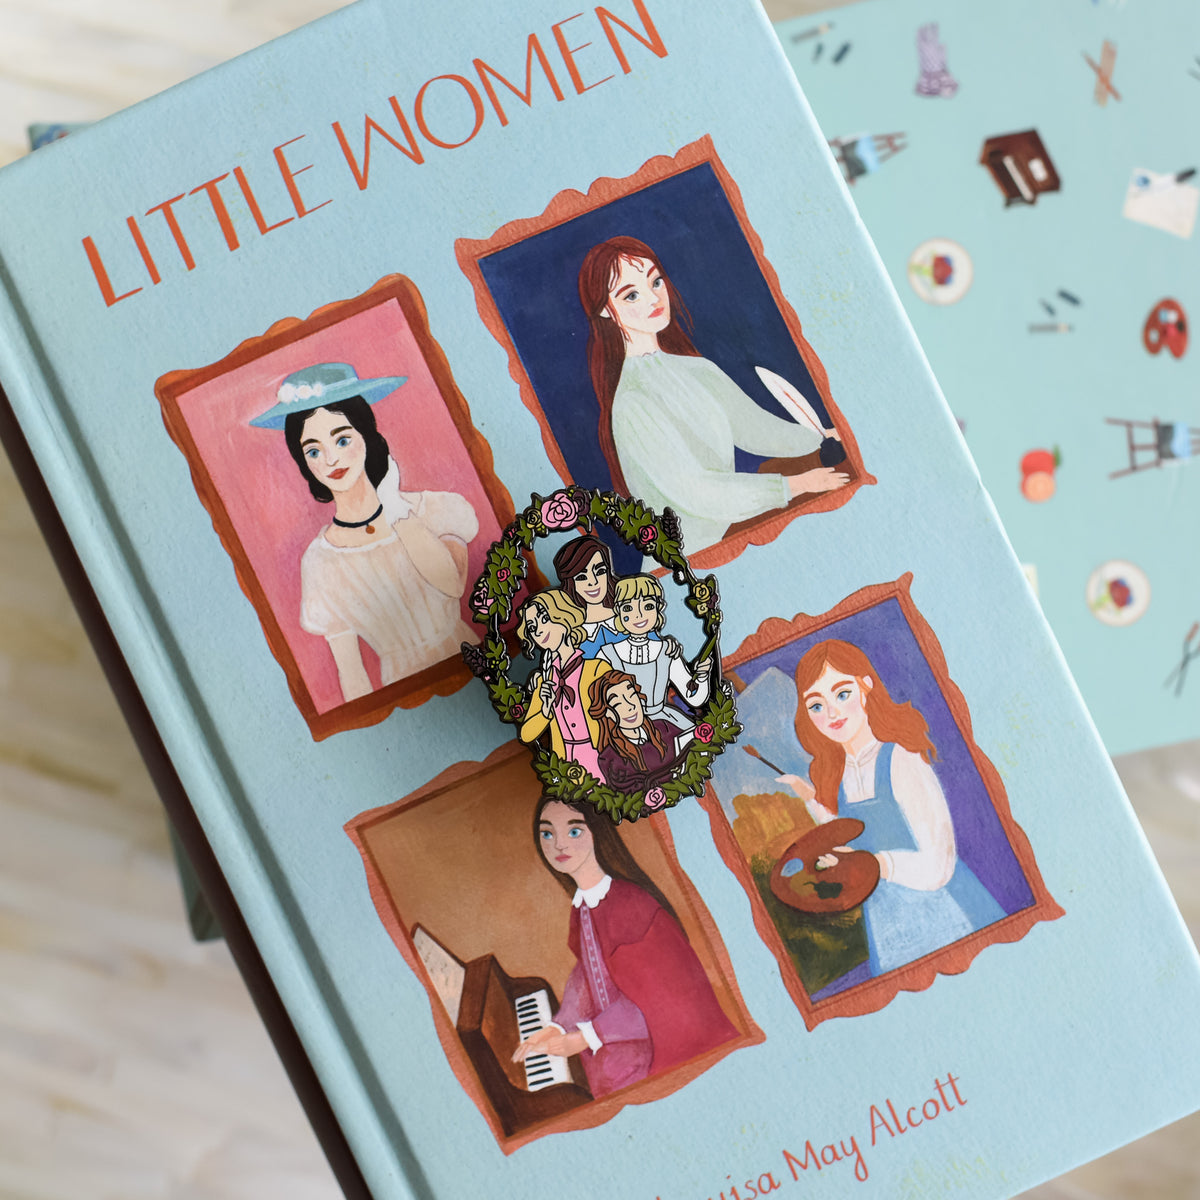 ENAMEL PIN - Little Women from LitJoy Crate | Collectibles &amp; Gifts for Booklovers